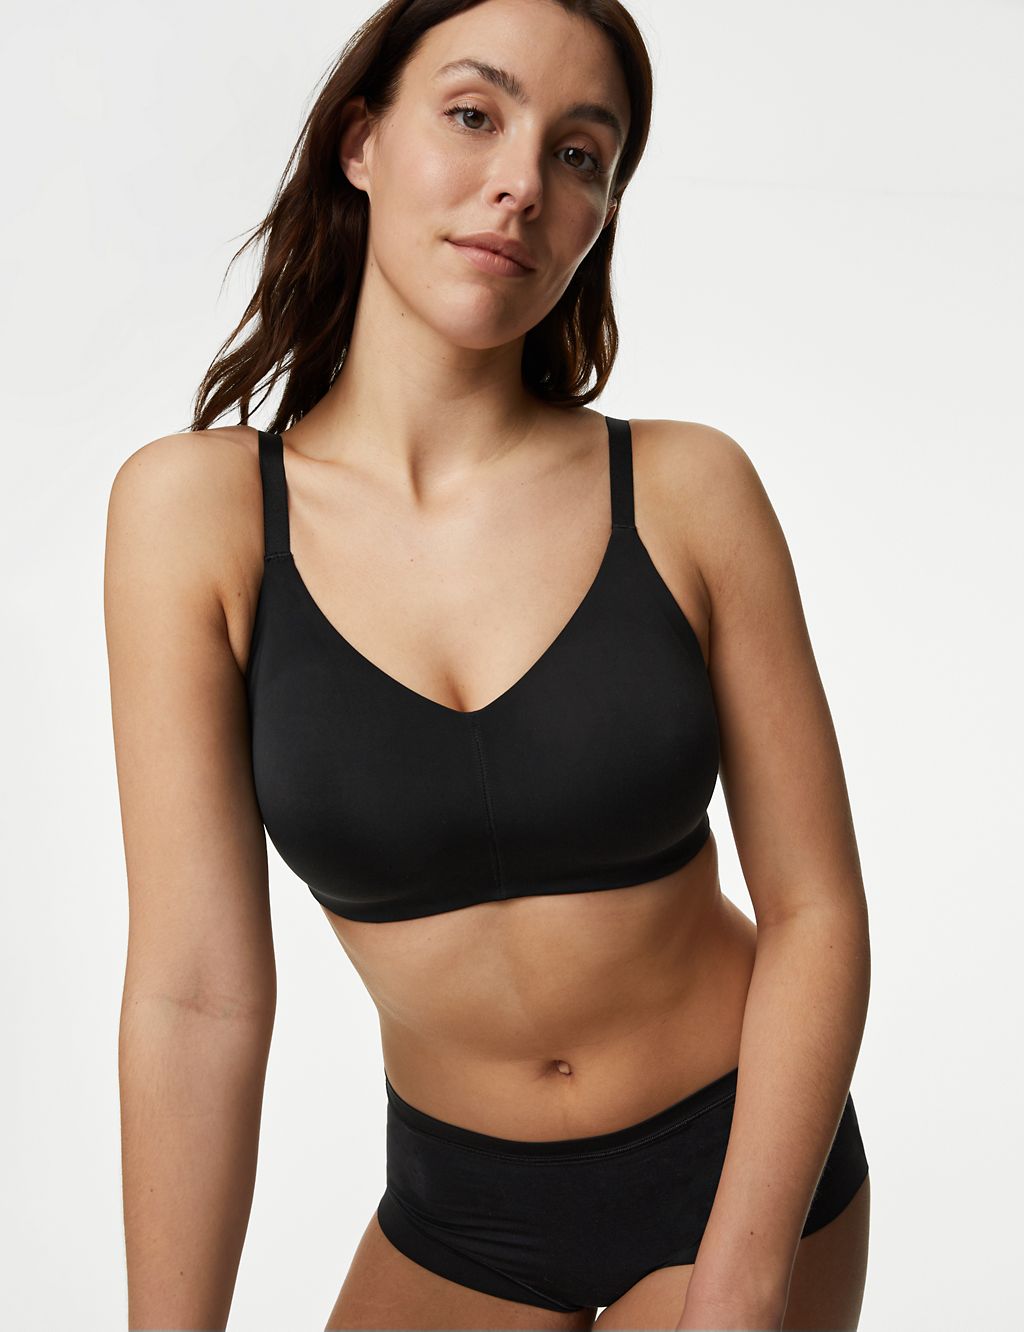 Flexifit™ Non-Wired Full Cup Bra F-H 7 of 7